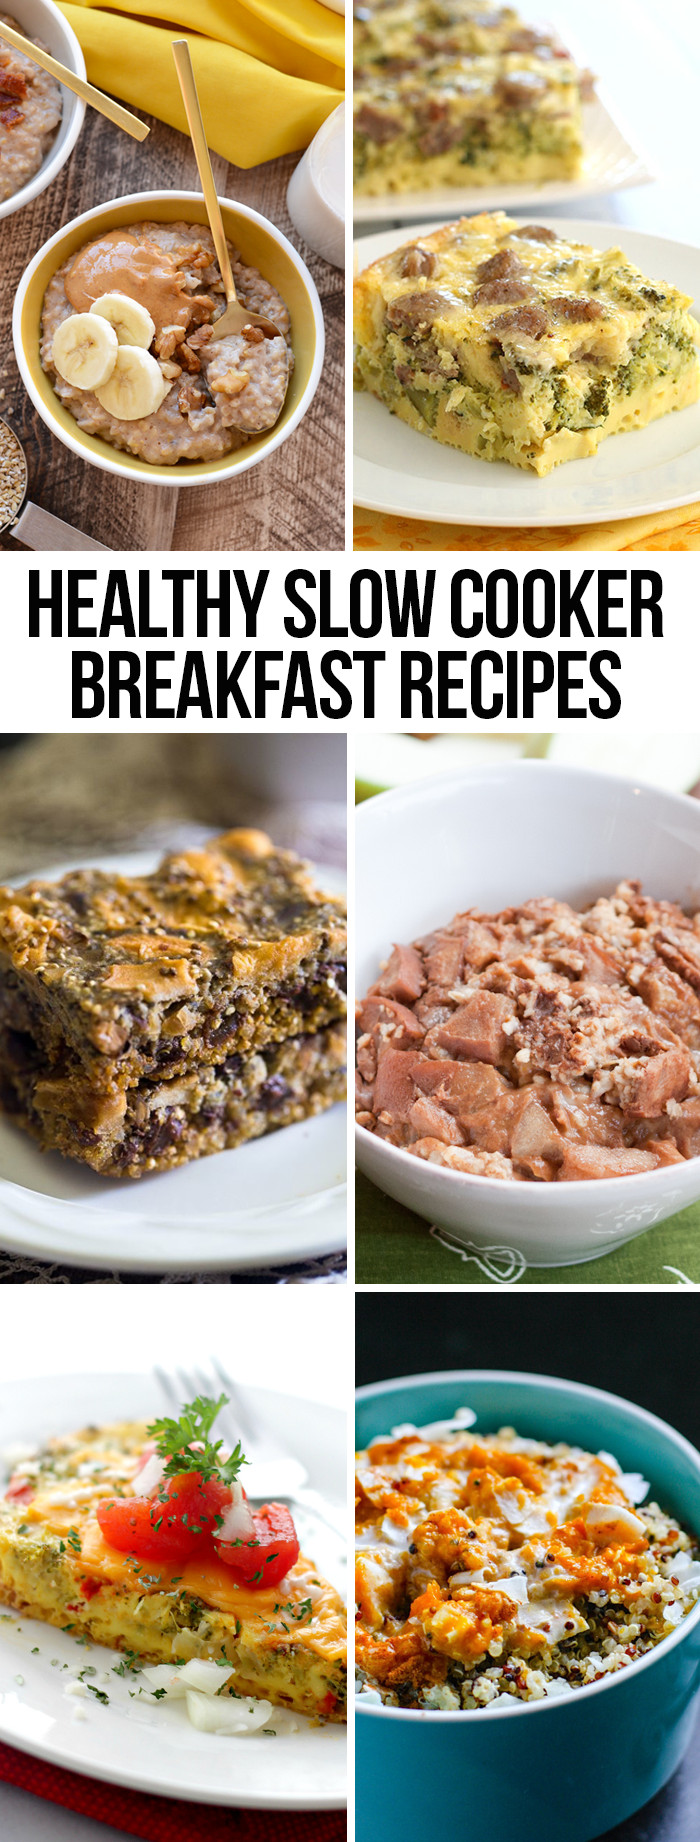 Easy Healthy Slow Cooker Recipes
 Healthy Slow Cooker Breakfast Recipes